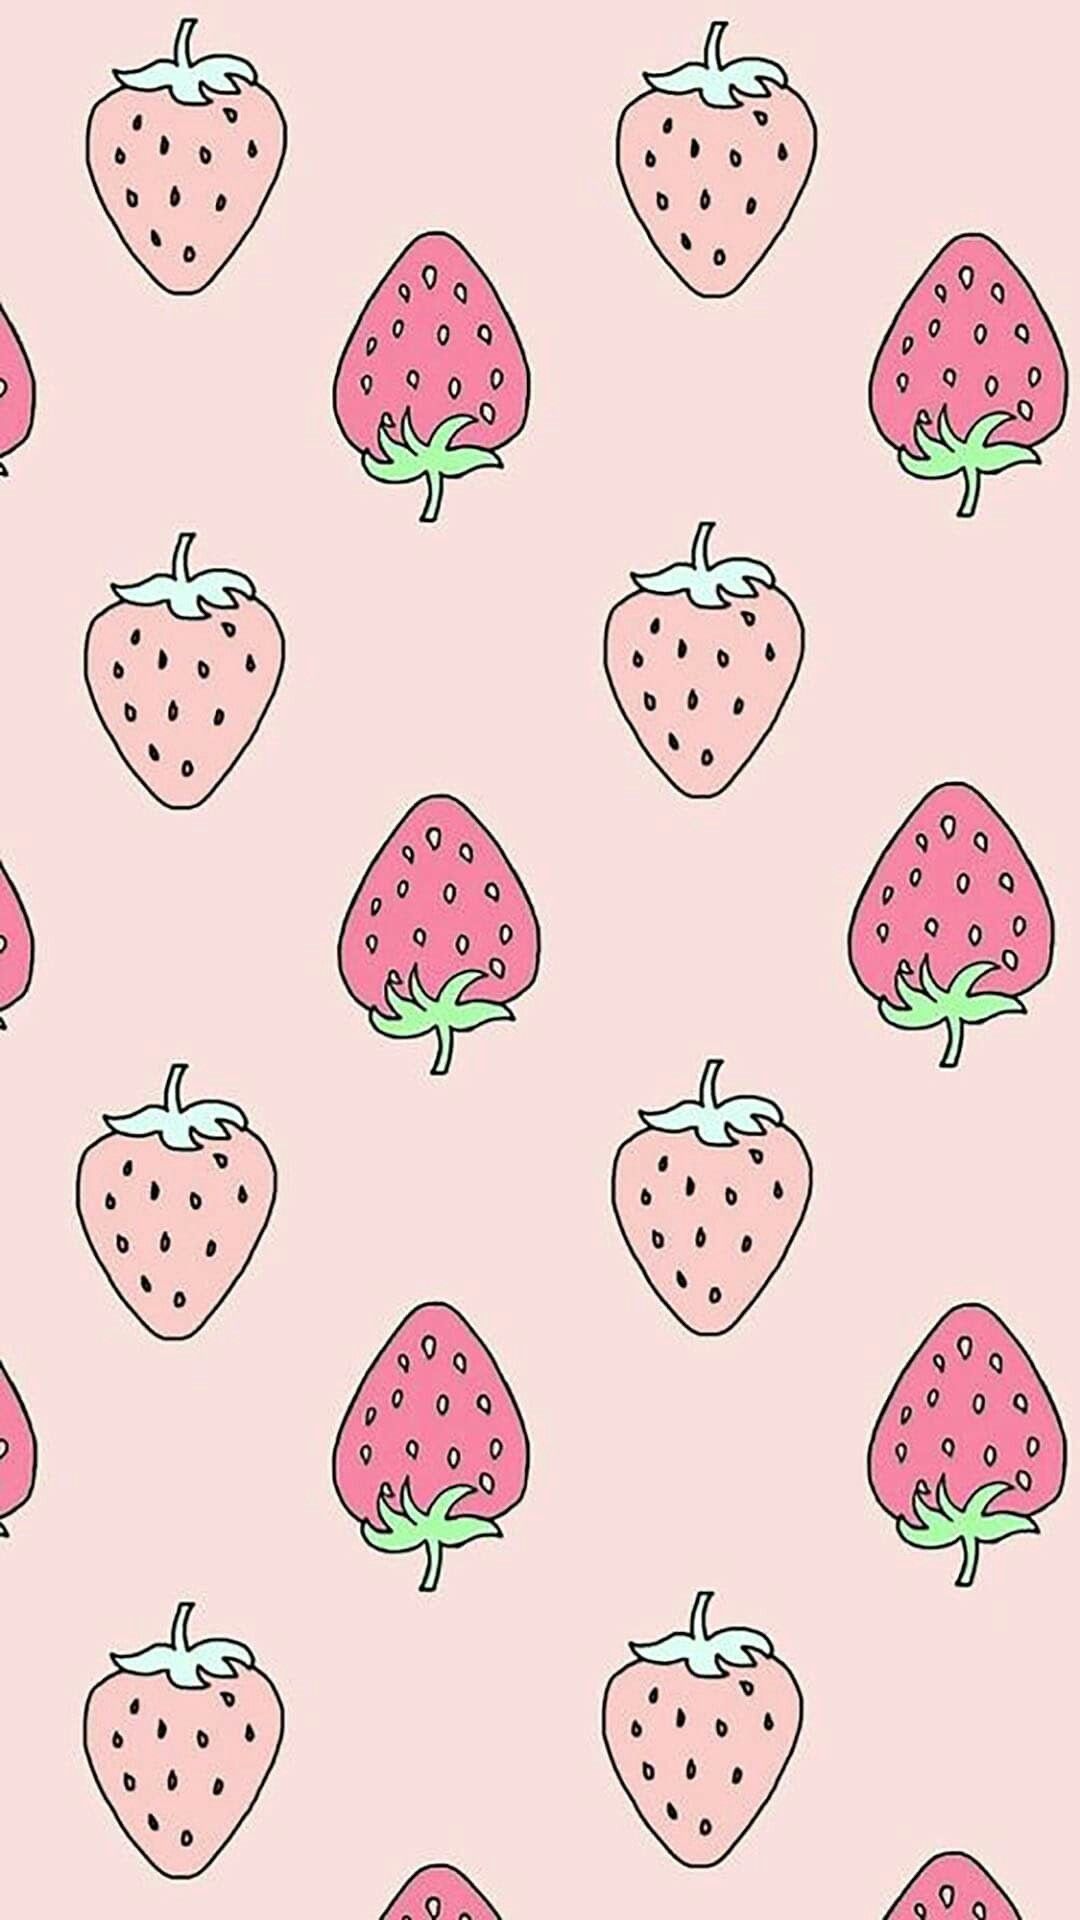 Cute strawberry wallpaper for iPhone with high-resolution 1080x1920 pixel. You can use this wallpaper for your iPhone 5, 6, 7, 8, X, XS, XR backgrounds, Mobile Screensaver, or iPad Lock Screen - Fruit, strawberry